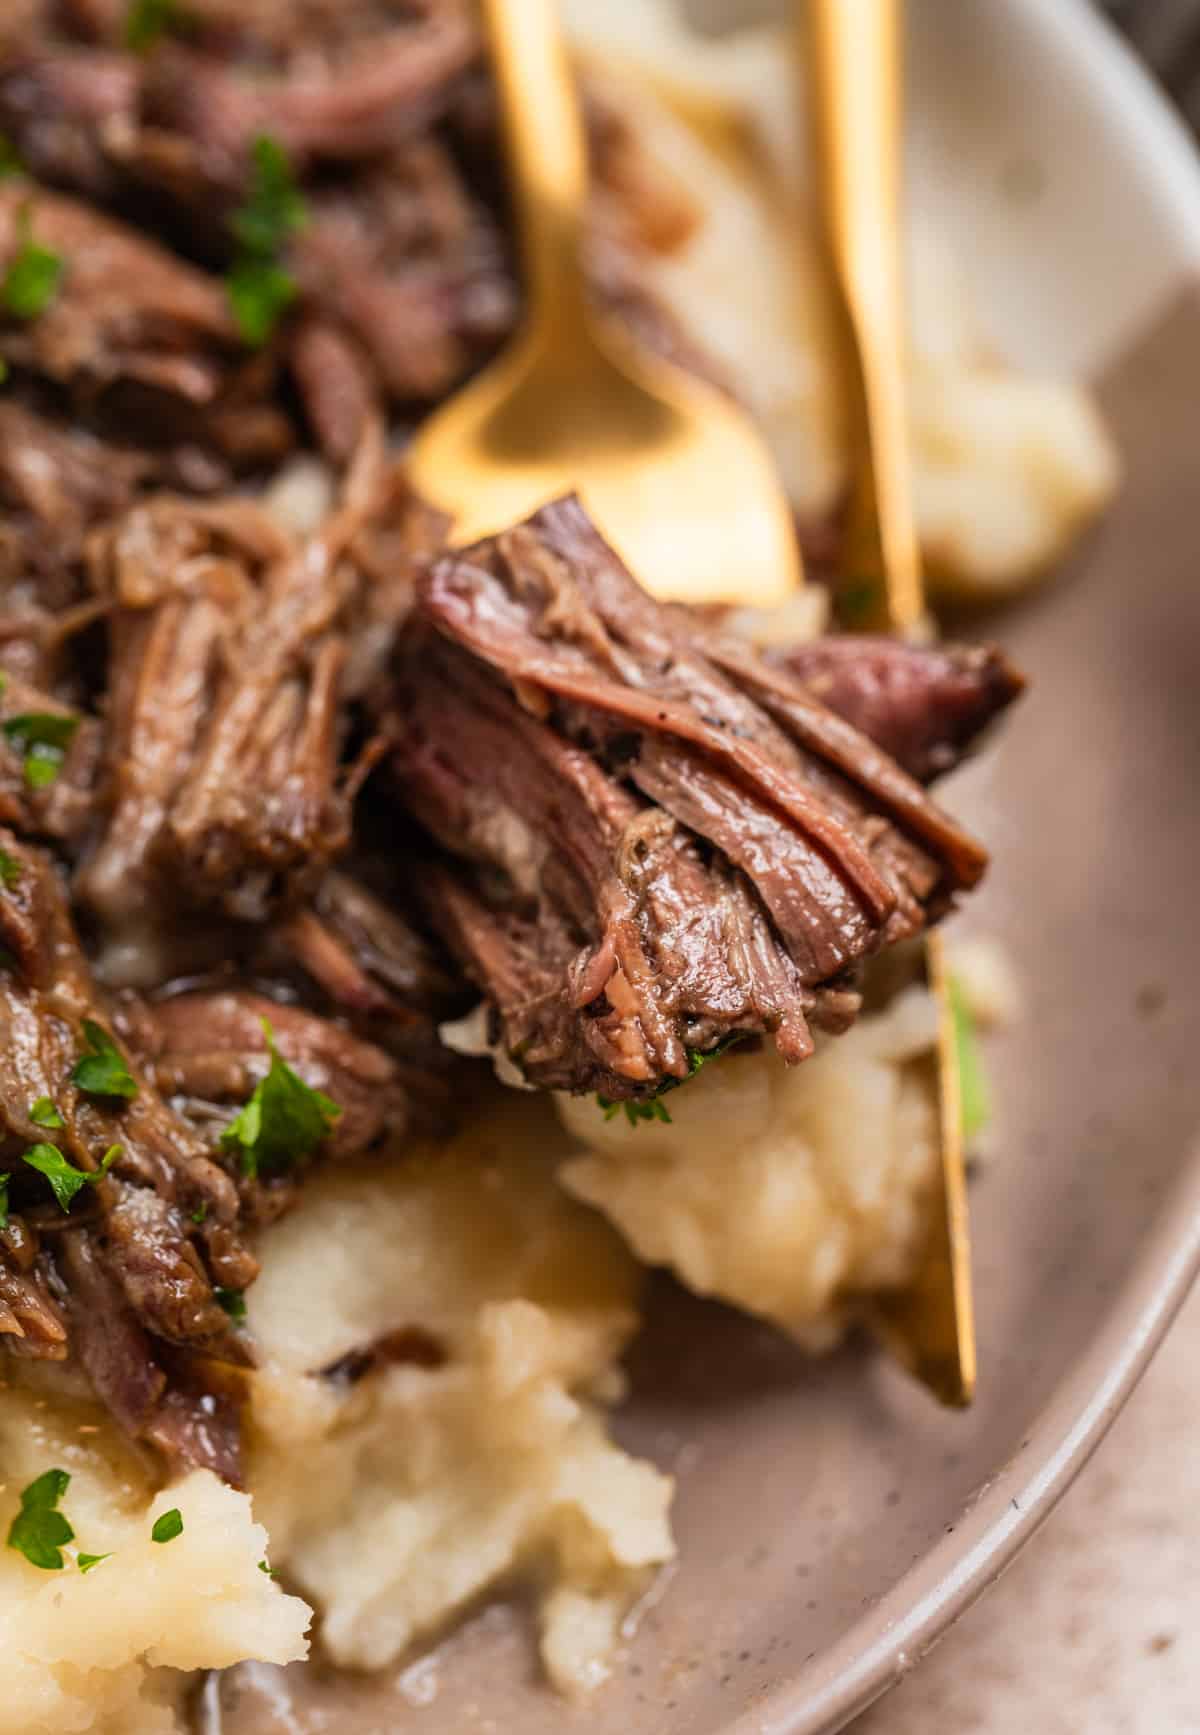 Piece of shredded beef on fork with mashed potatoes on plate.